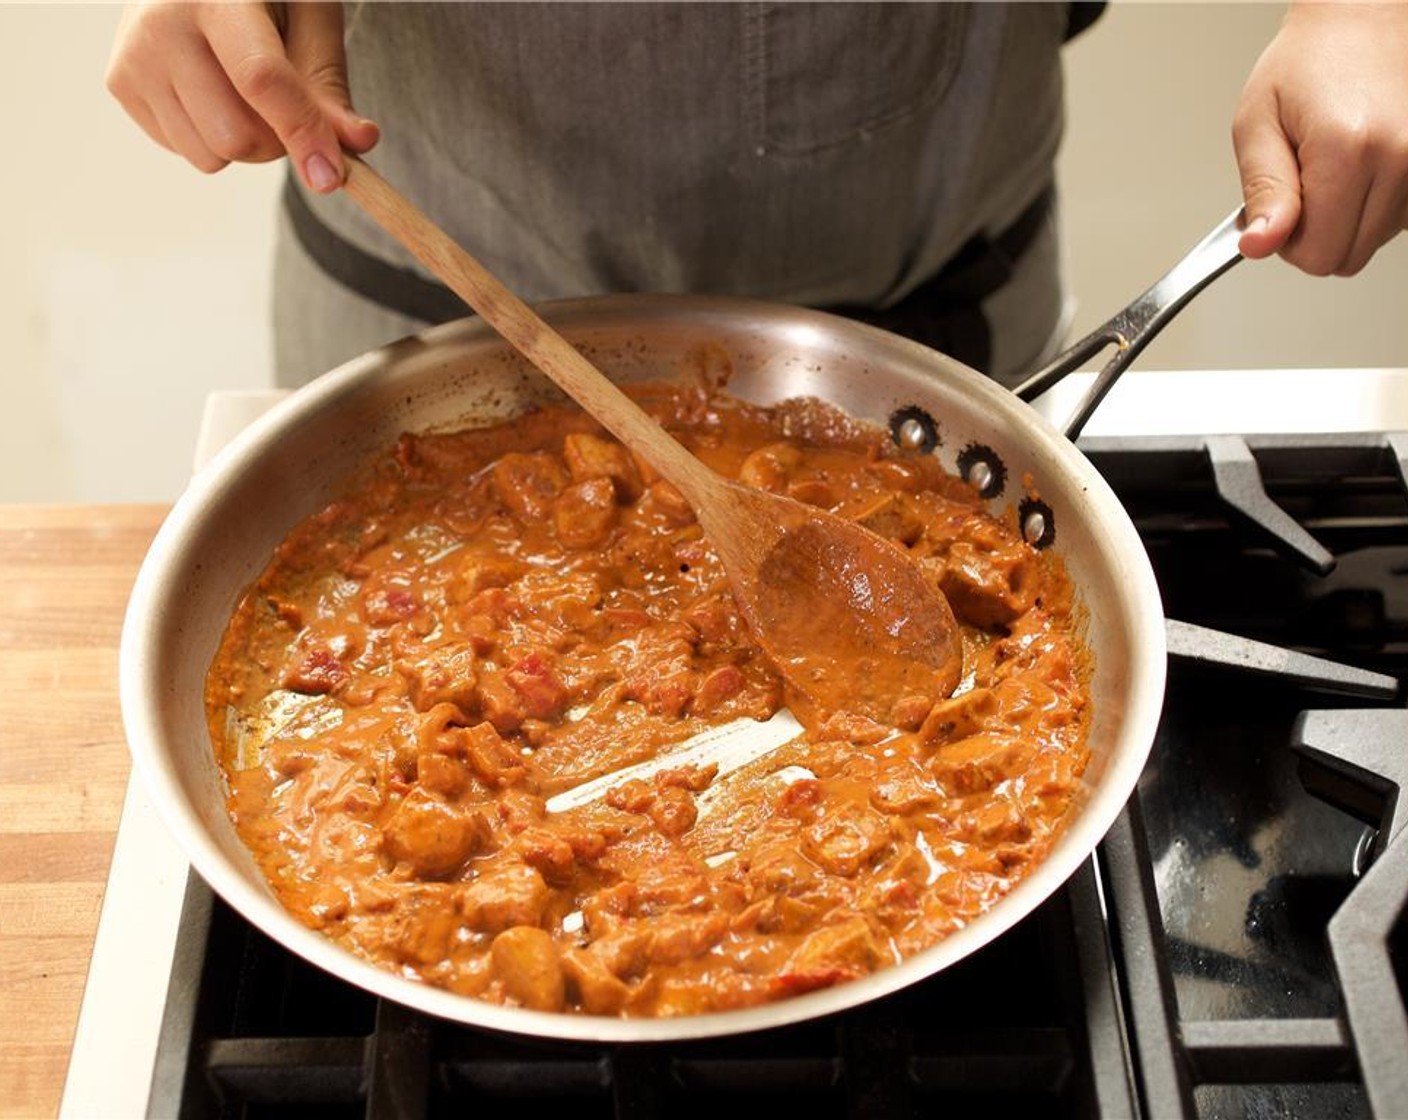 step 12 In the same pan as the chicken, add Coconut Milk (3.5 fl oz), Canned Stewed Tomatoes (3/4 cup), Tomato Sauce (1/2 cup), and Granulated Sugar (1/4 cup). Stir to combine.